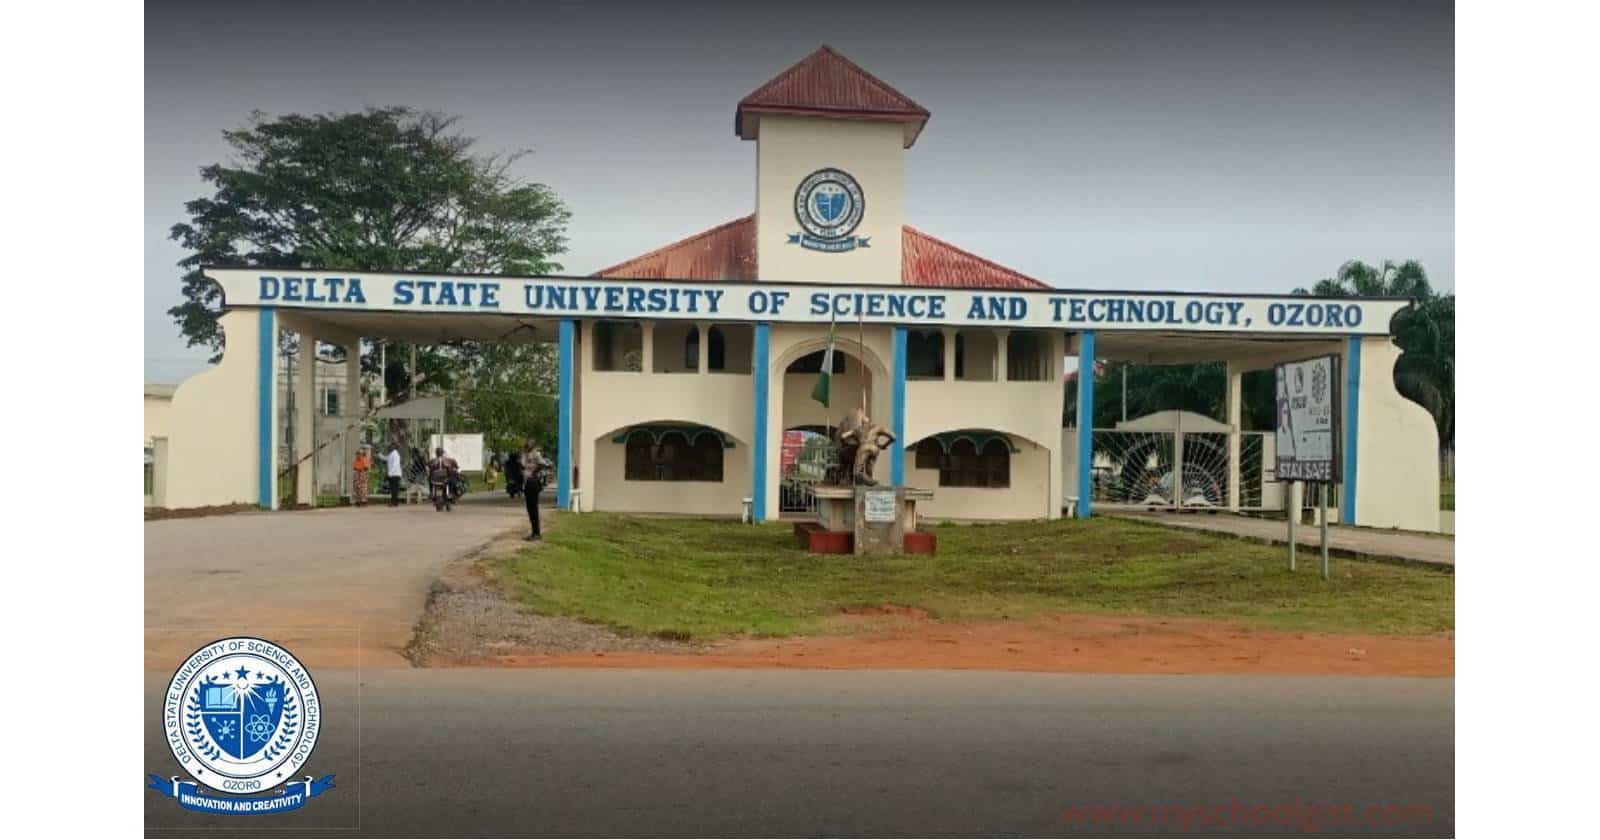 Delta State University of Science and Technology (DSUST) Shuts Down